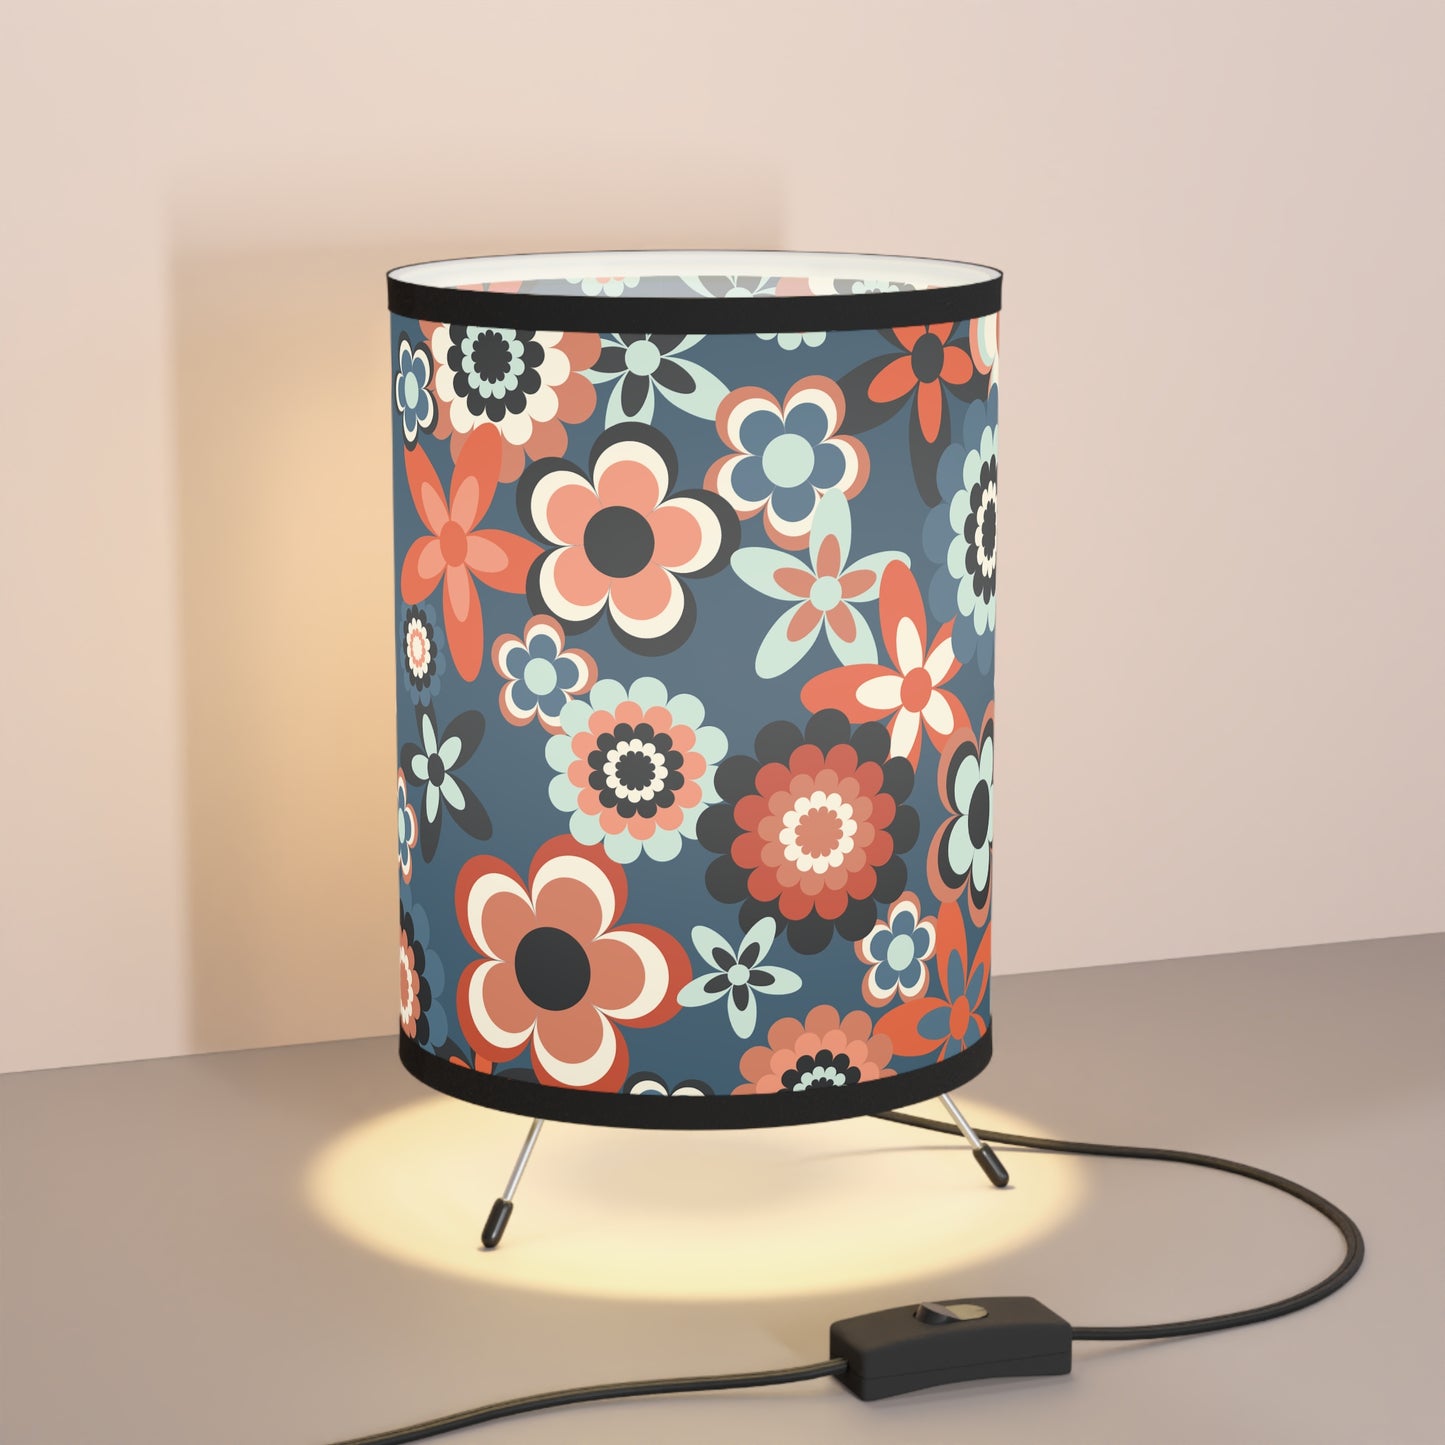 Retro 60s 70s Groovy Flowers Mid Century Mod Coral & Blue Tripod Accent Lamp